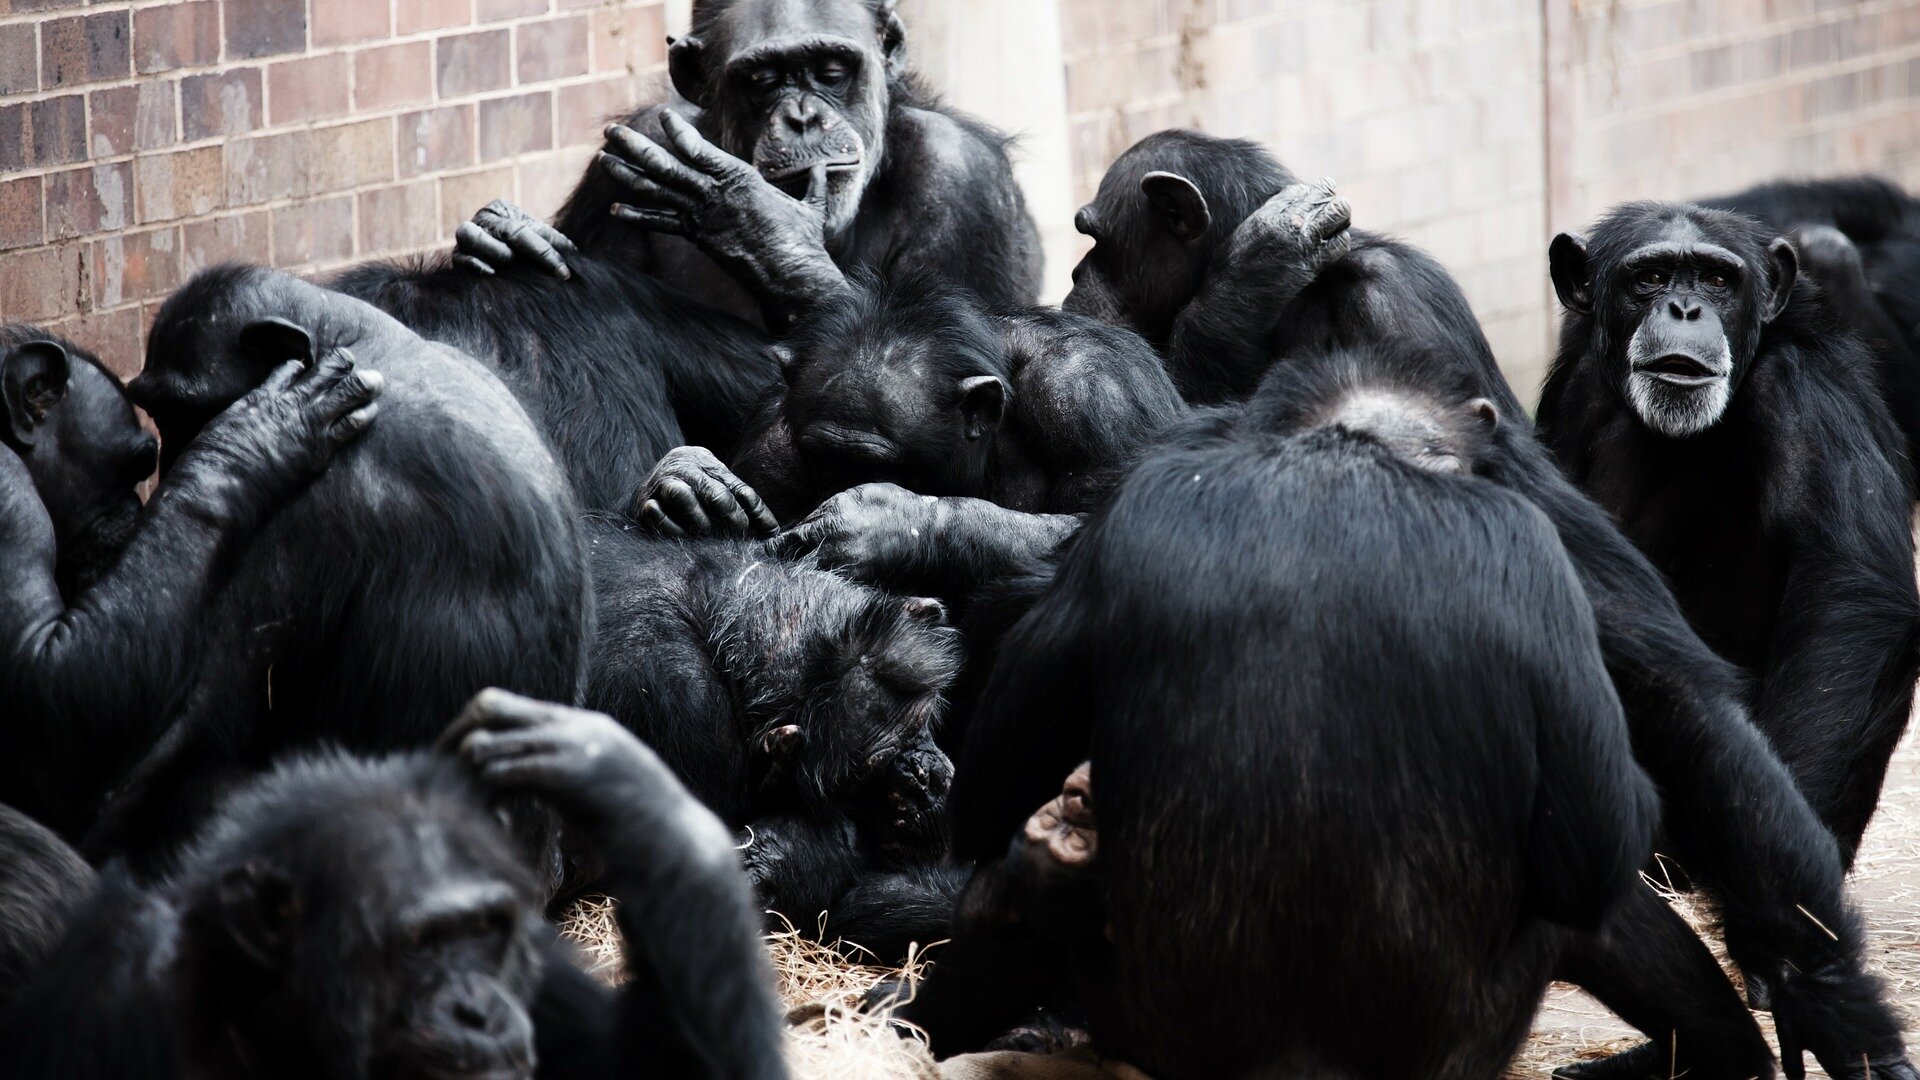 #Do apes have humor? Study shows that great apes playfully tease each other